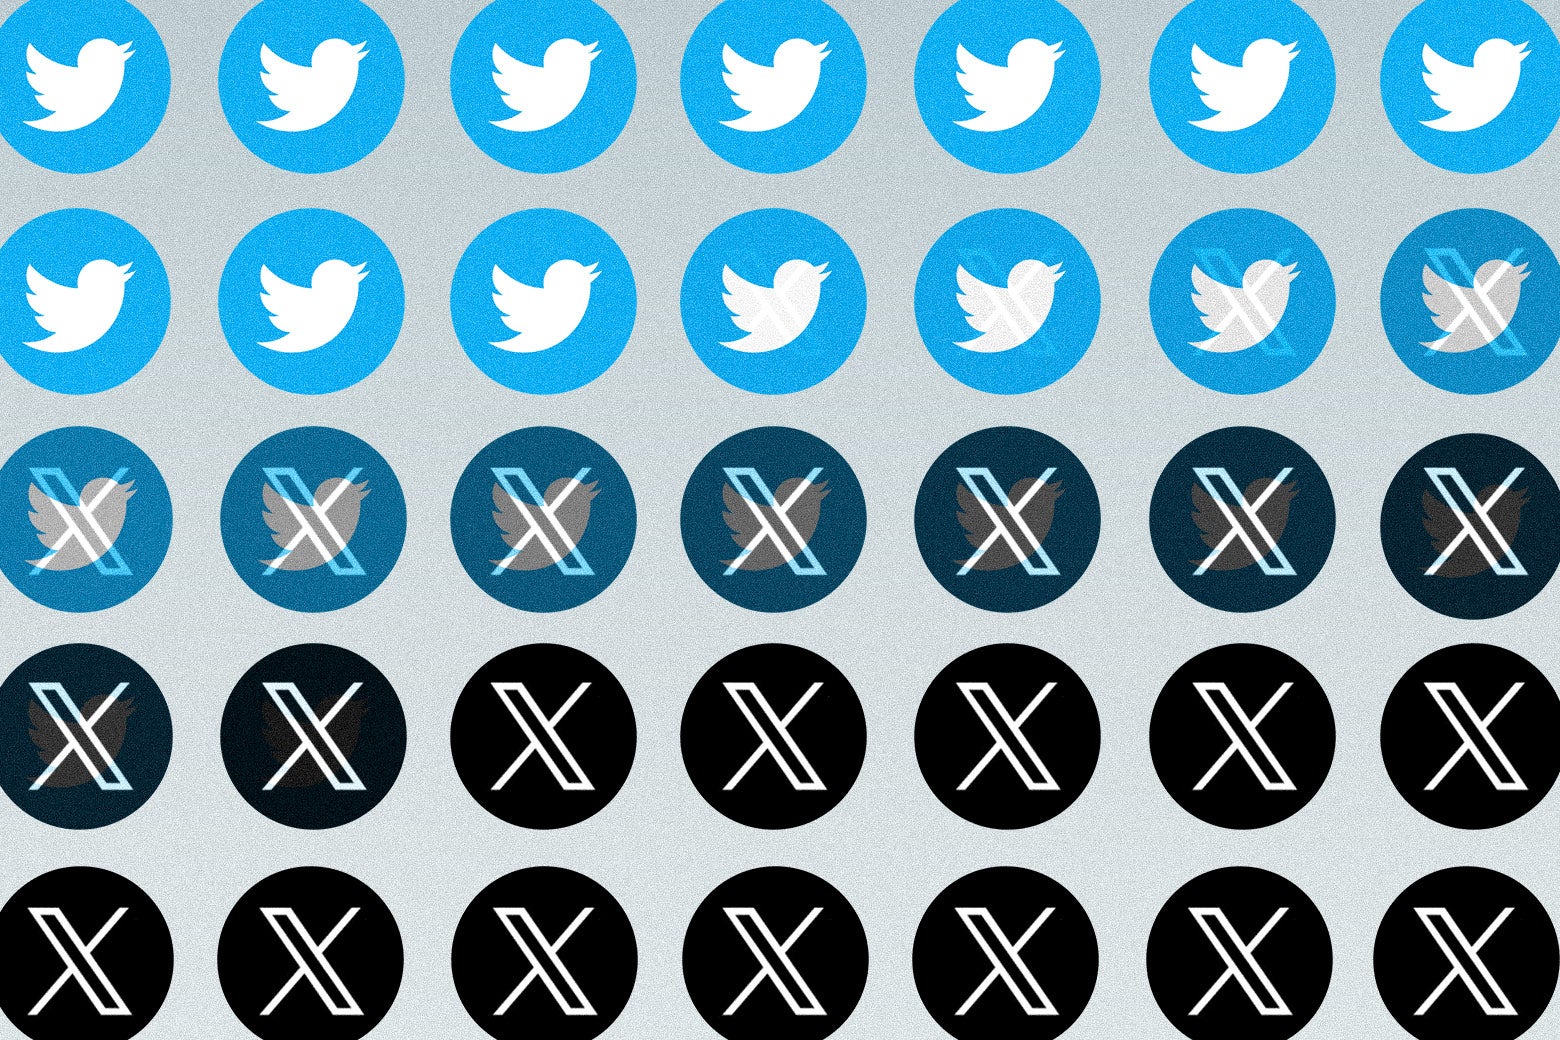 Five rows of circular logos that show the Twitter bird eventually transforming into the X brand.